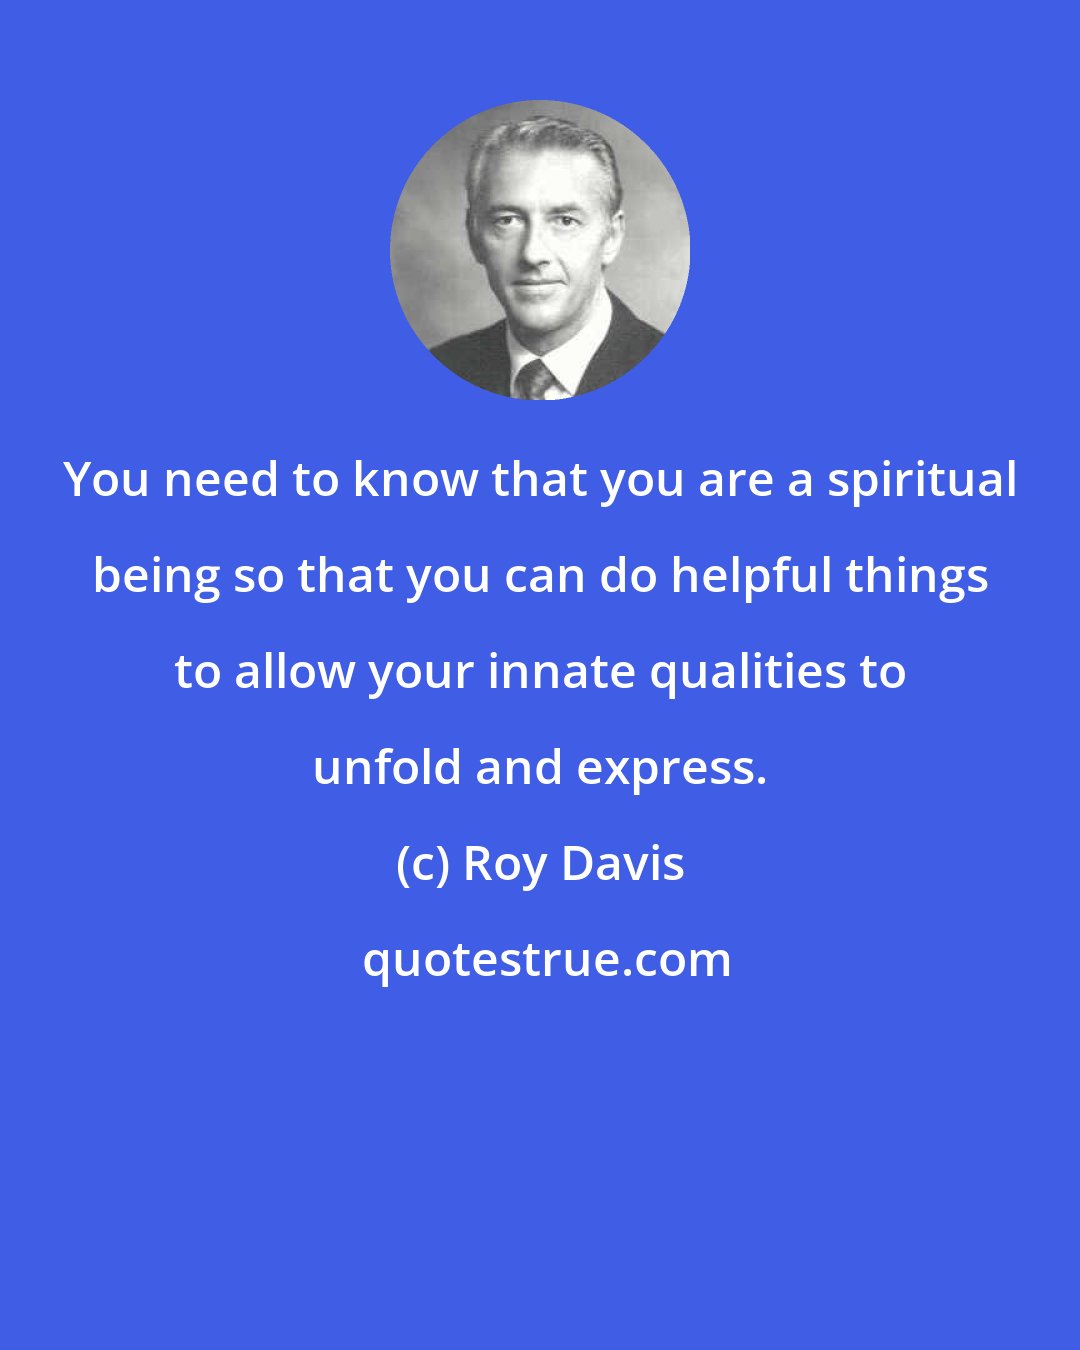 Roy Davis: You need to know that you are a spiritual being so that you can do helpful things to allow your innate qualities to unfold and express.